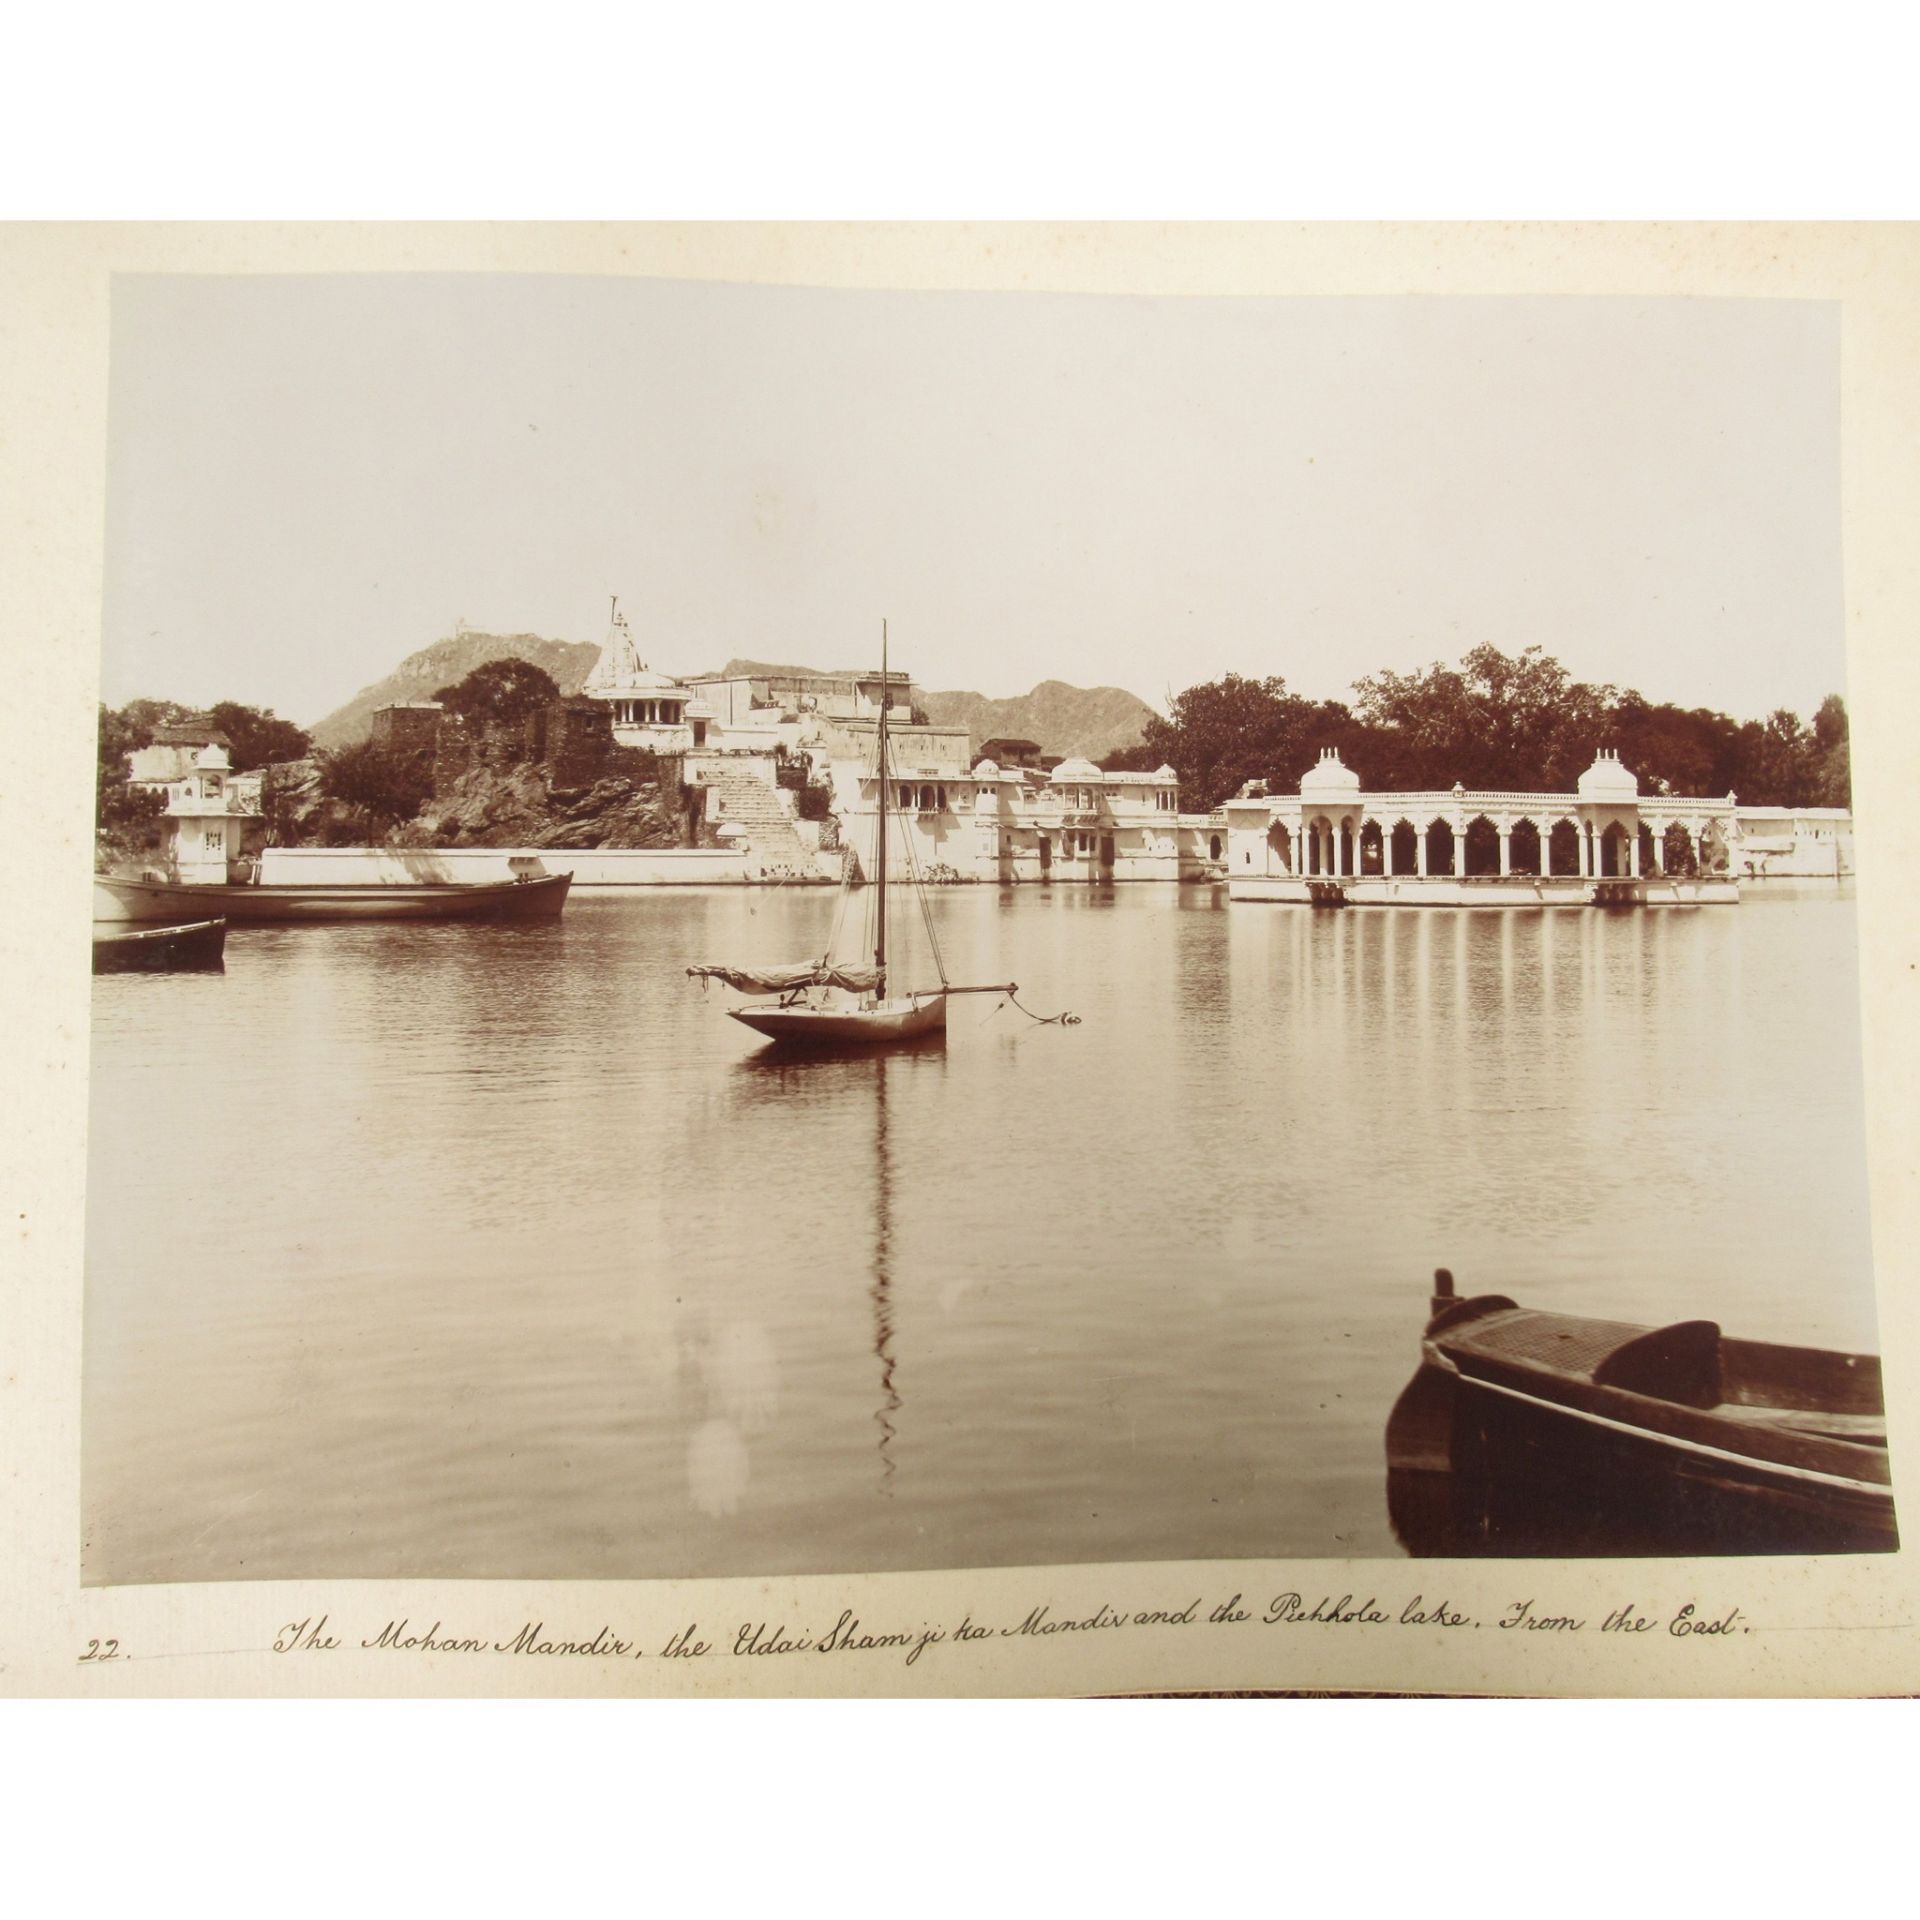 India: a photograph album Photographs of Rajasthan by Mohan Lal of Udaipur, late 19th century - Image 16 of 23